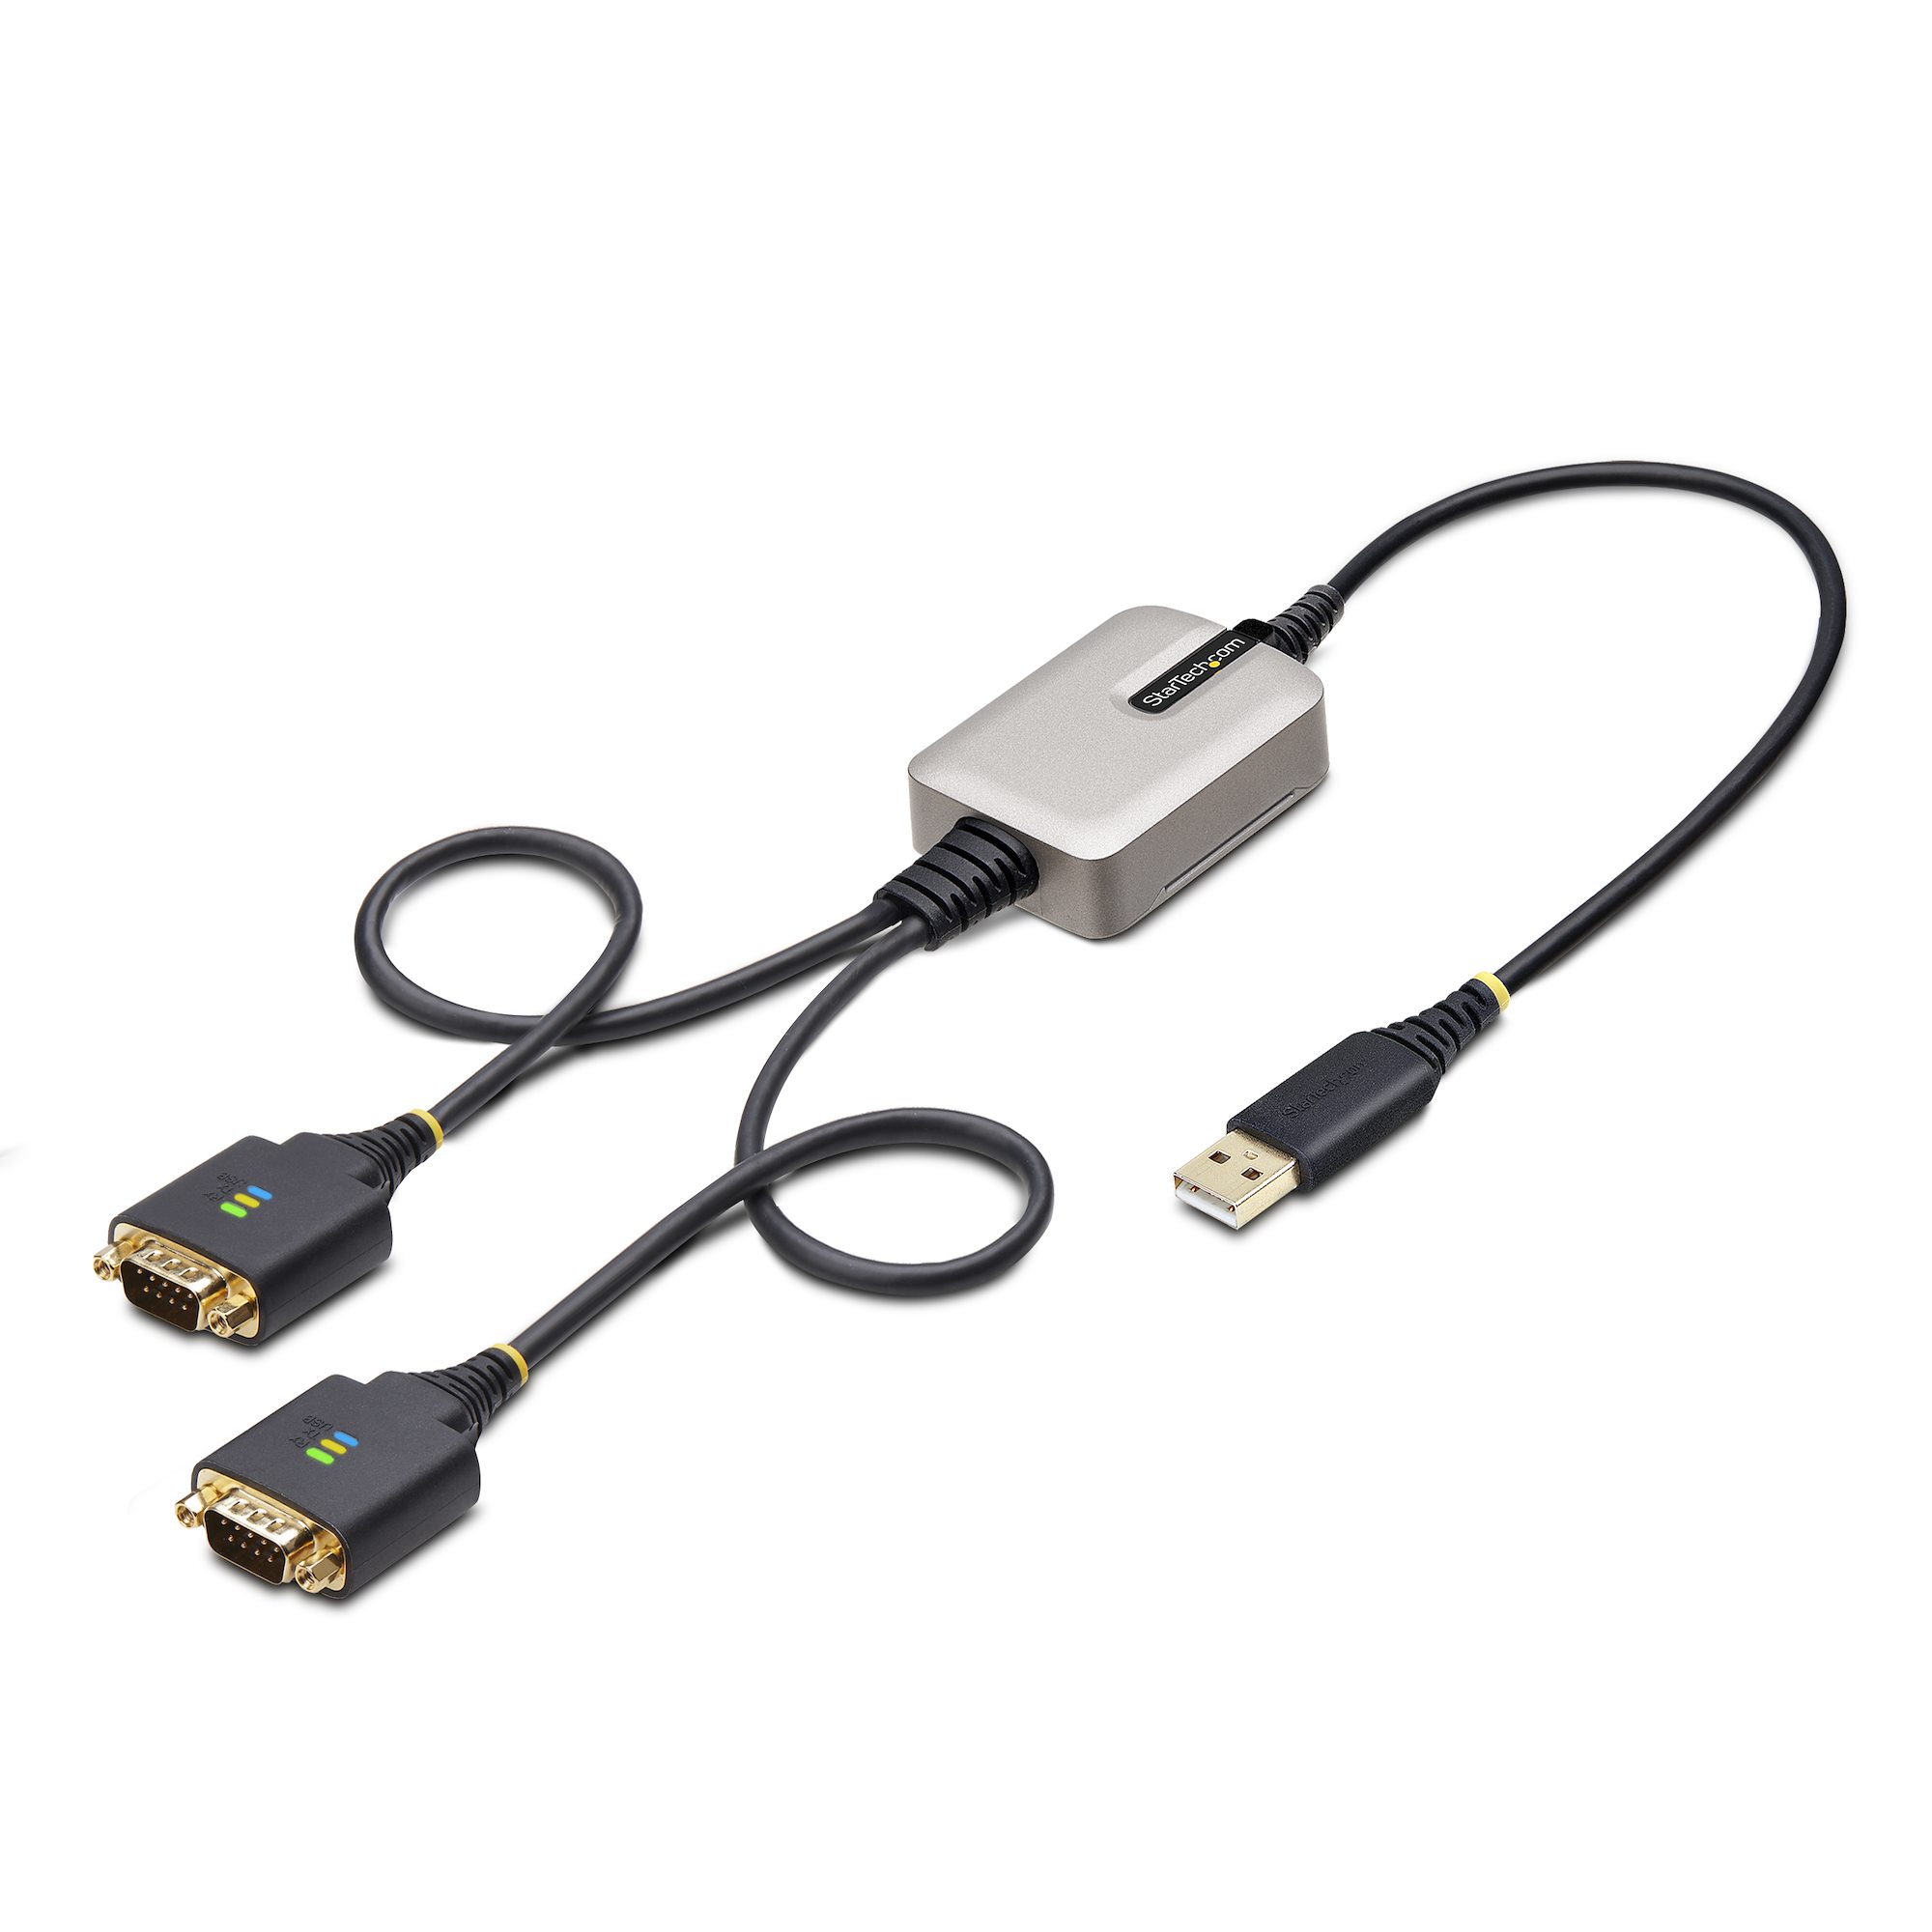 USB 2.0 adapter, USB-A/M to DB9 (RS232)/M, black/grey, Serial, USB 2.0, Adapter, Notebook & Computer